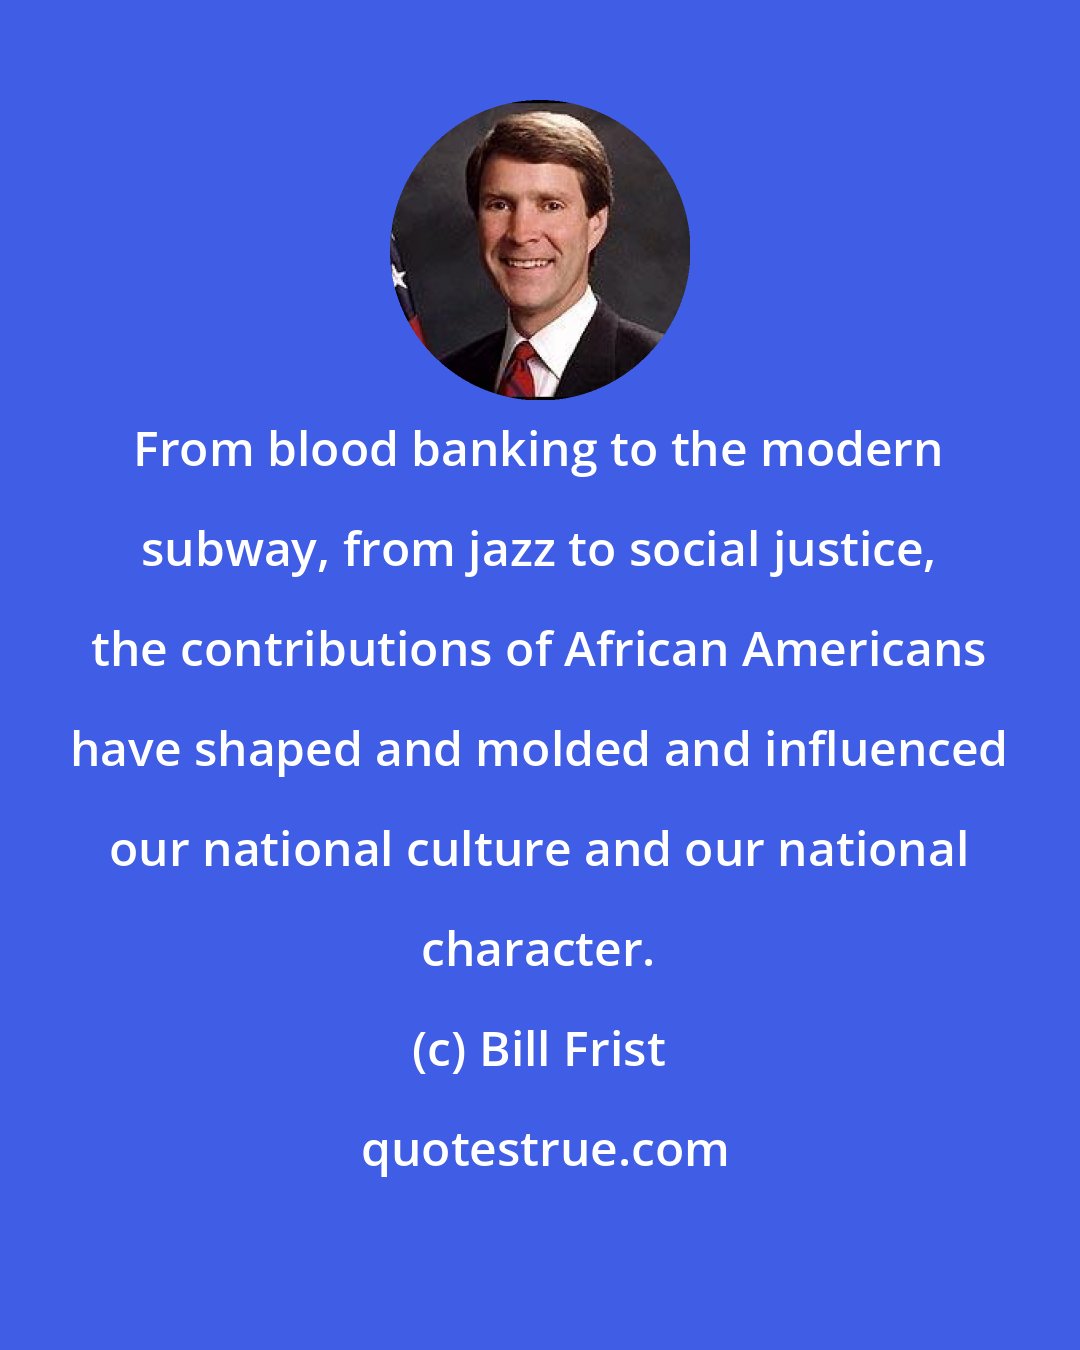 Bill Frist: From blood banking to the modern subway, from jazz to social justice, the contributions of African Americans have shaped and molded and influenced our national culture and our national character.